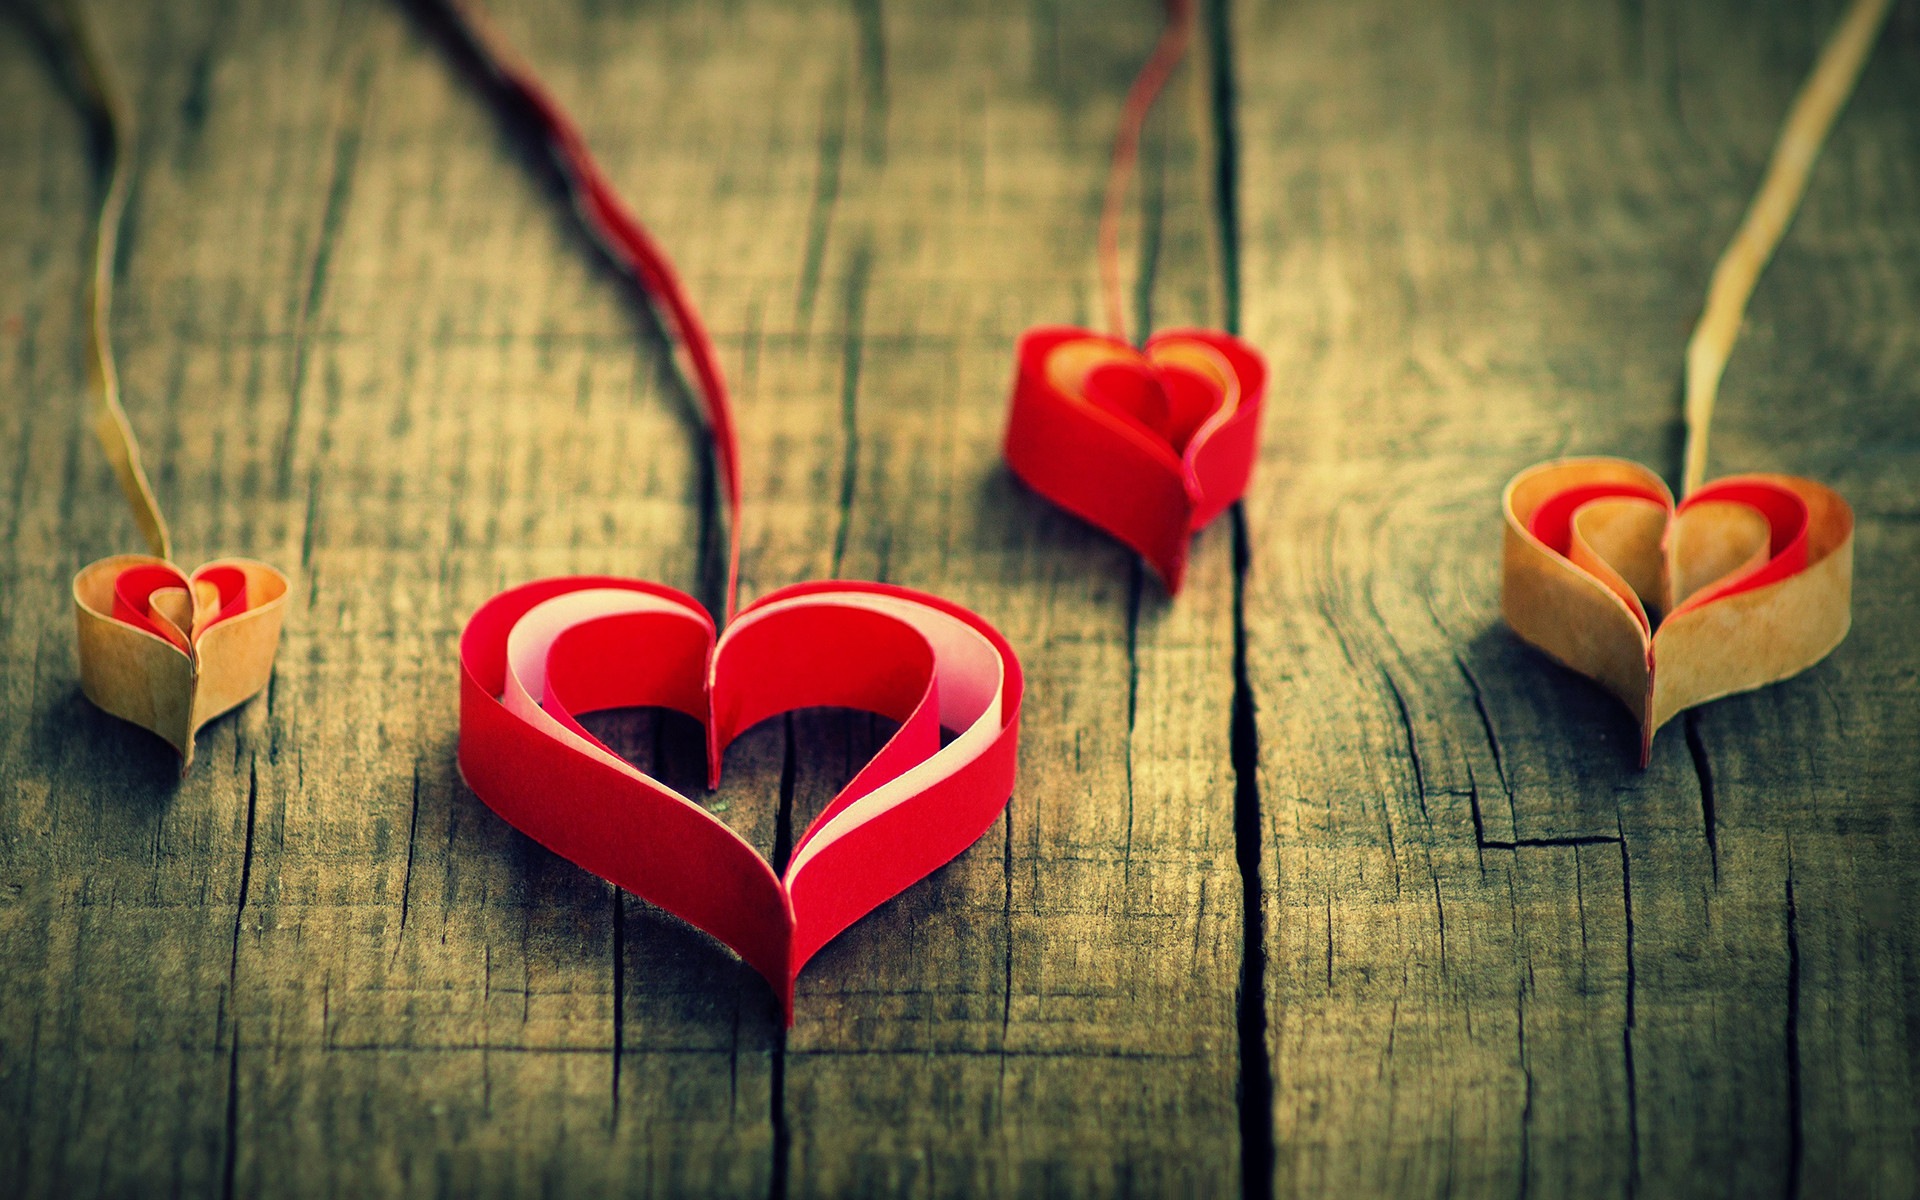 The theme of love, creative heart-shaped HD wallpapers #3 - 1920x1200